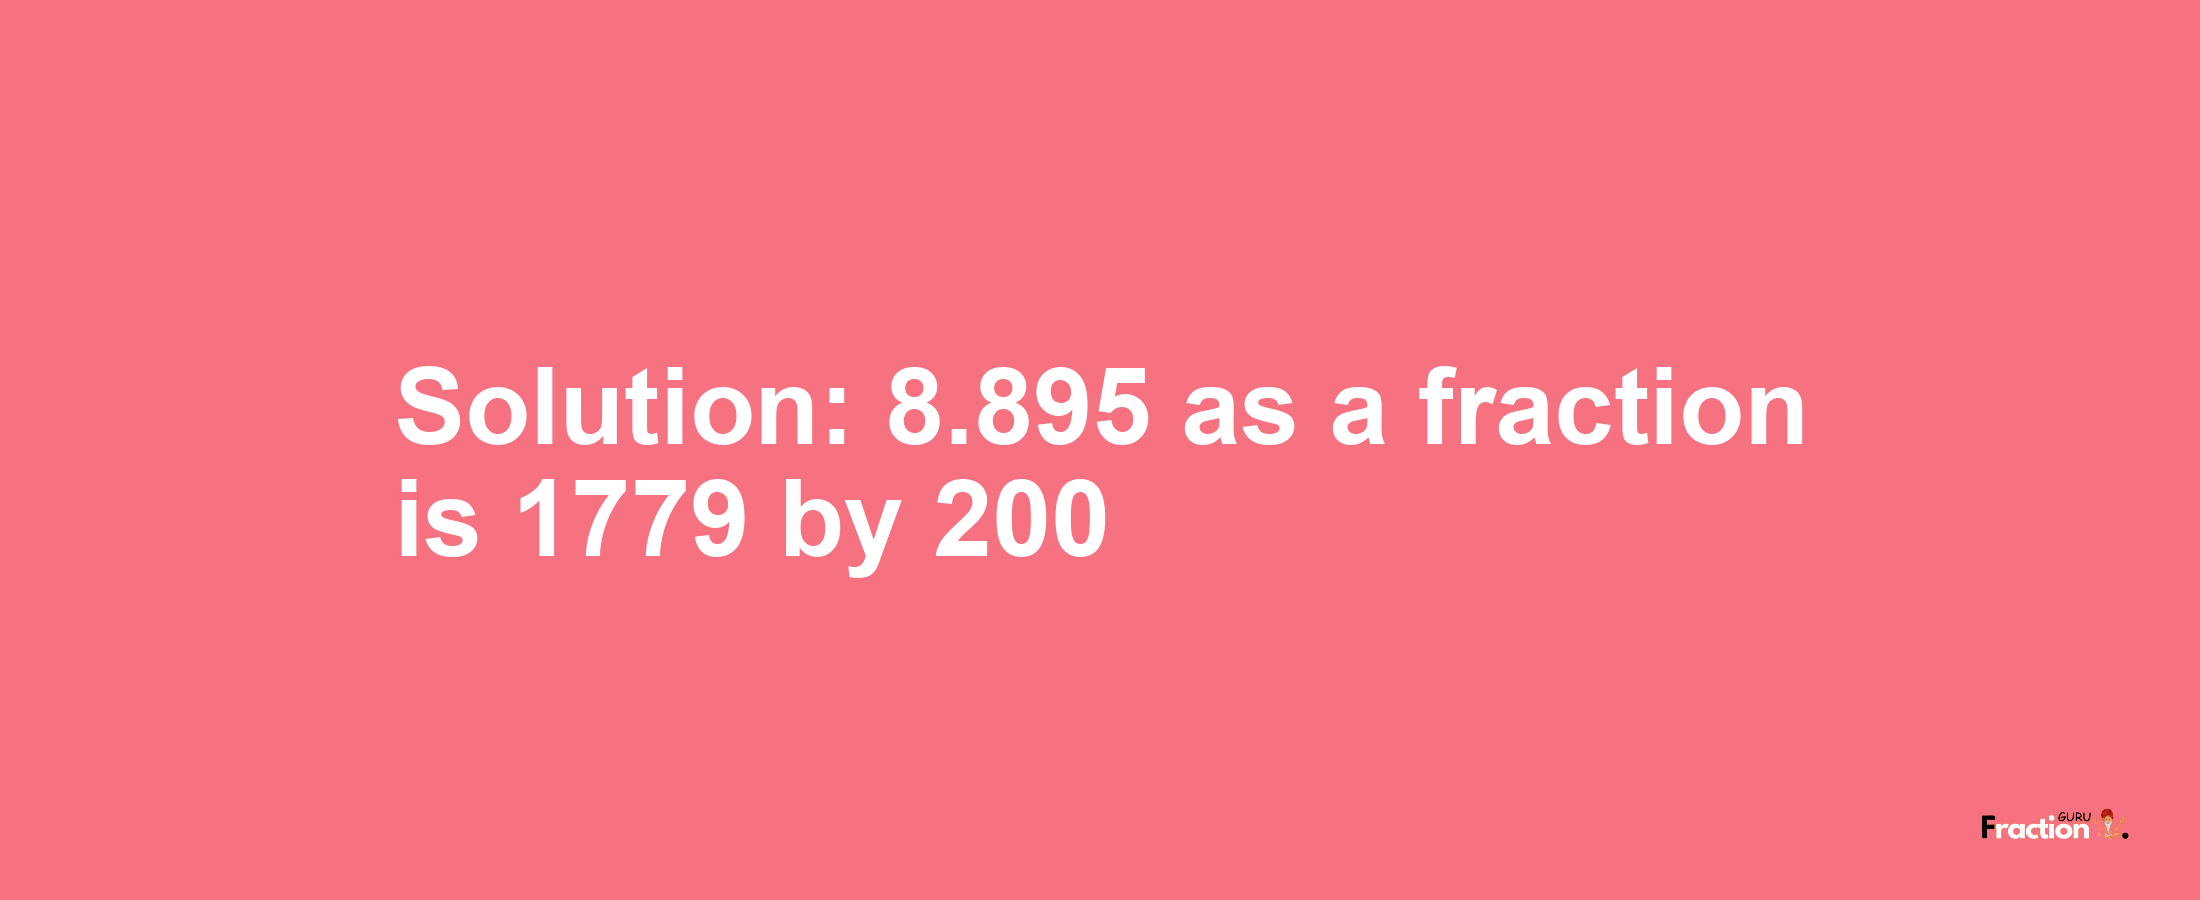 Solution:8.895 as a fraction is 1779/200